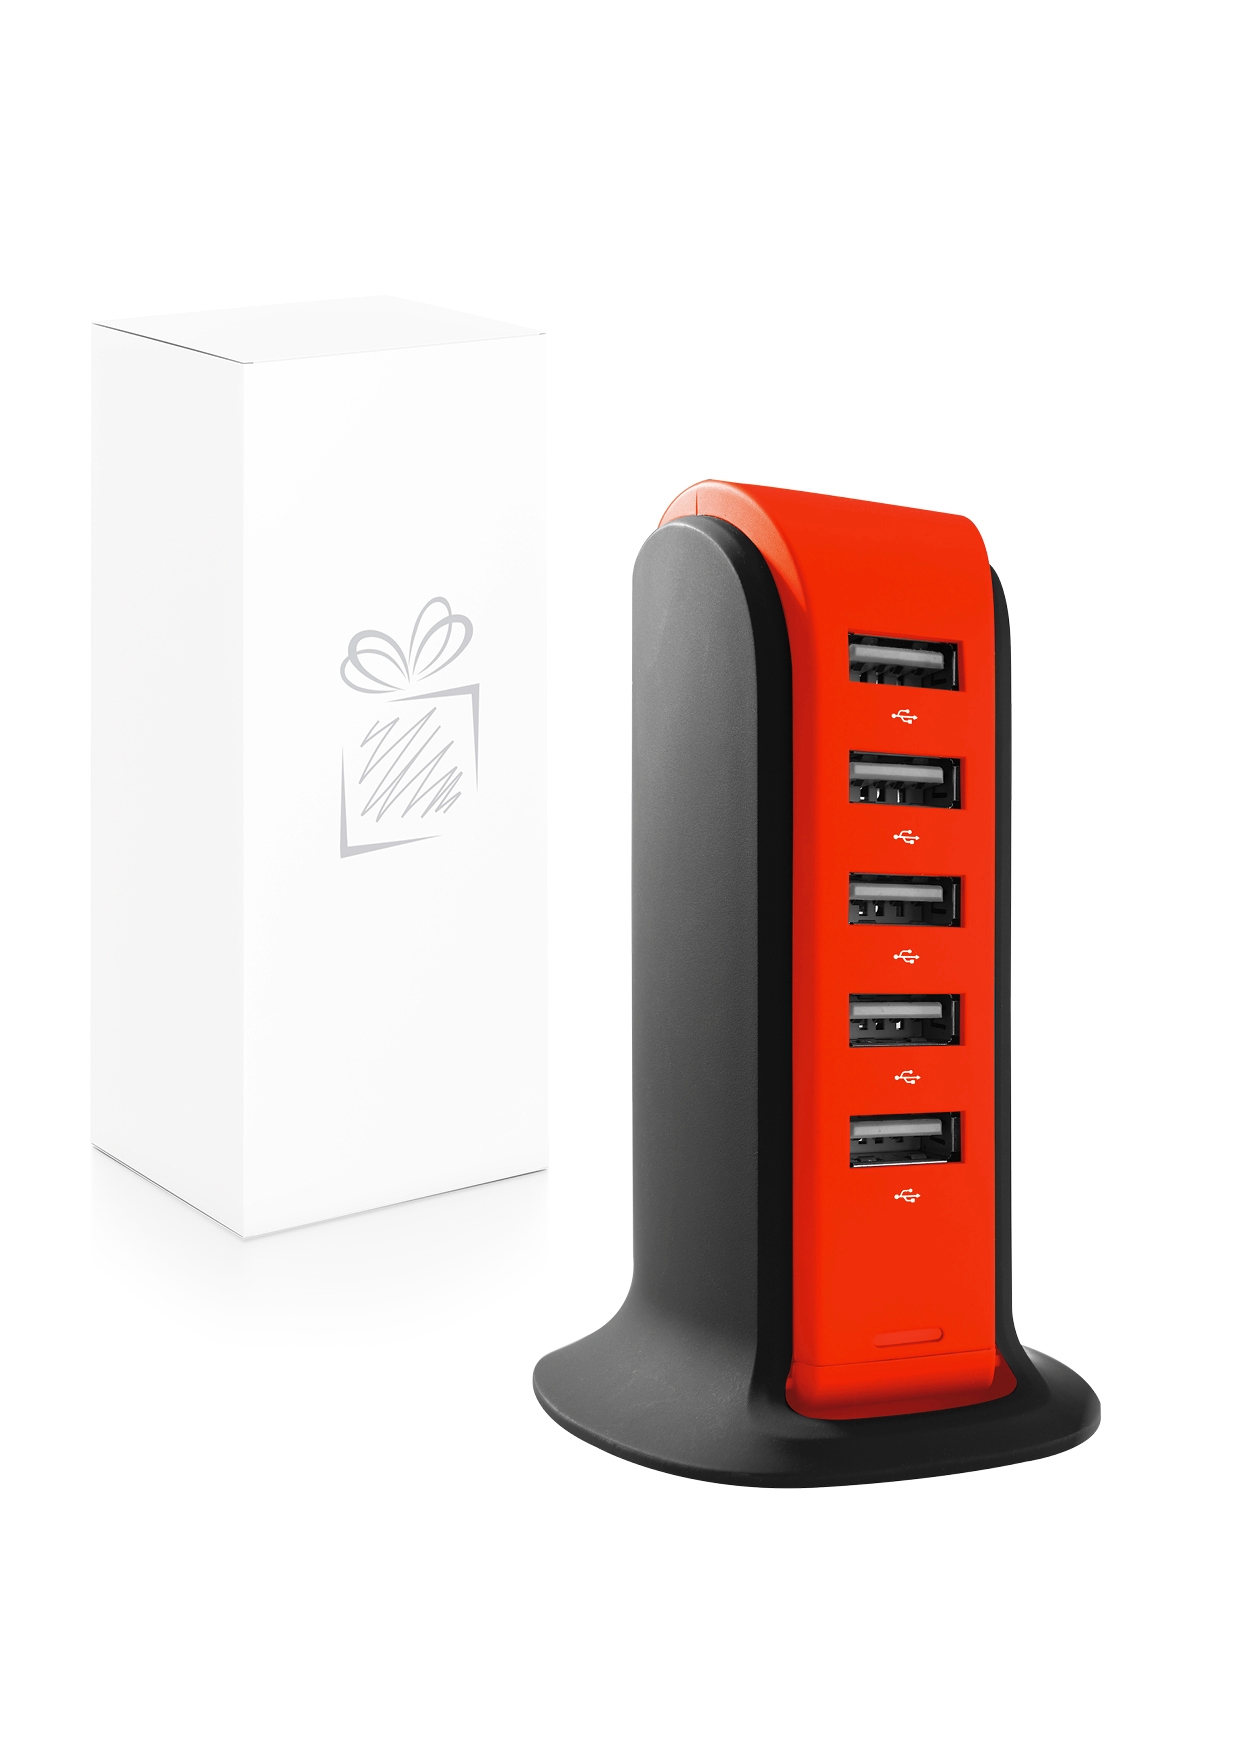 Branded 5 USB CHARGER TOWER PAINTURISSIMO